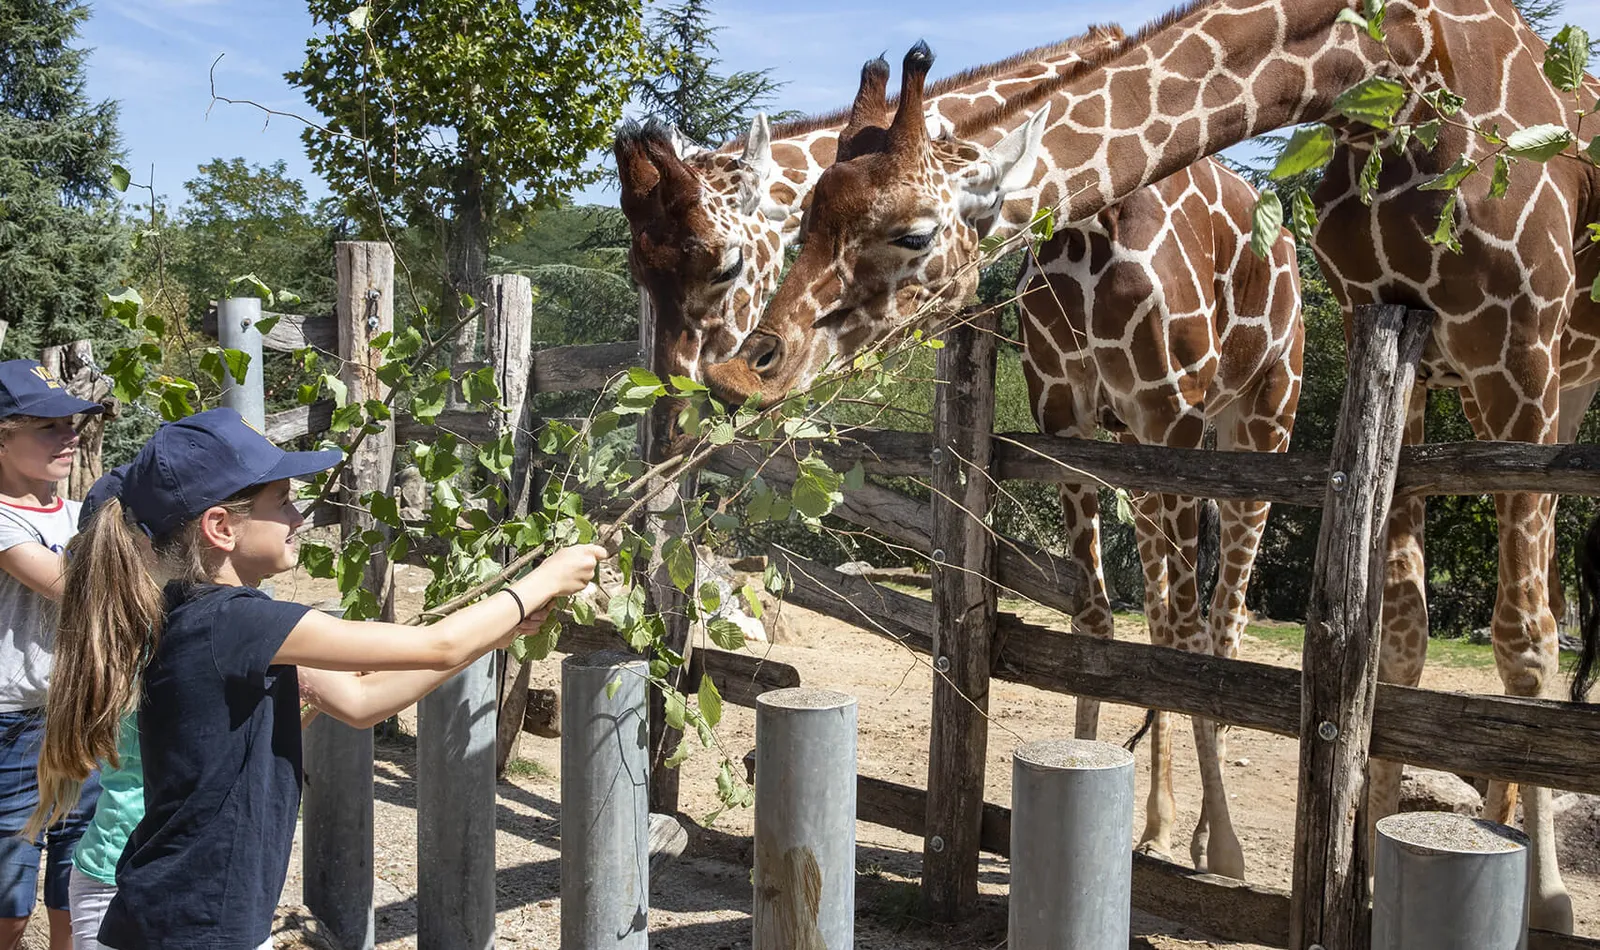 A Day at the Zoo: Family Fun and Wildlife Education